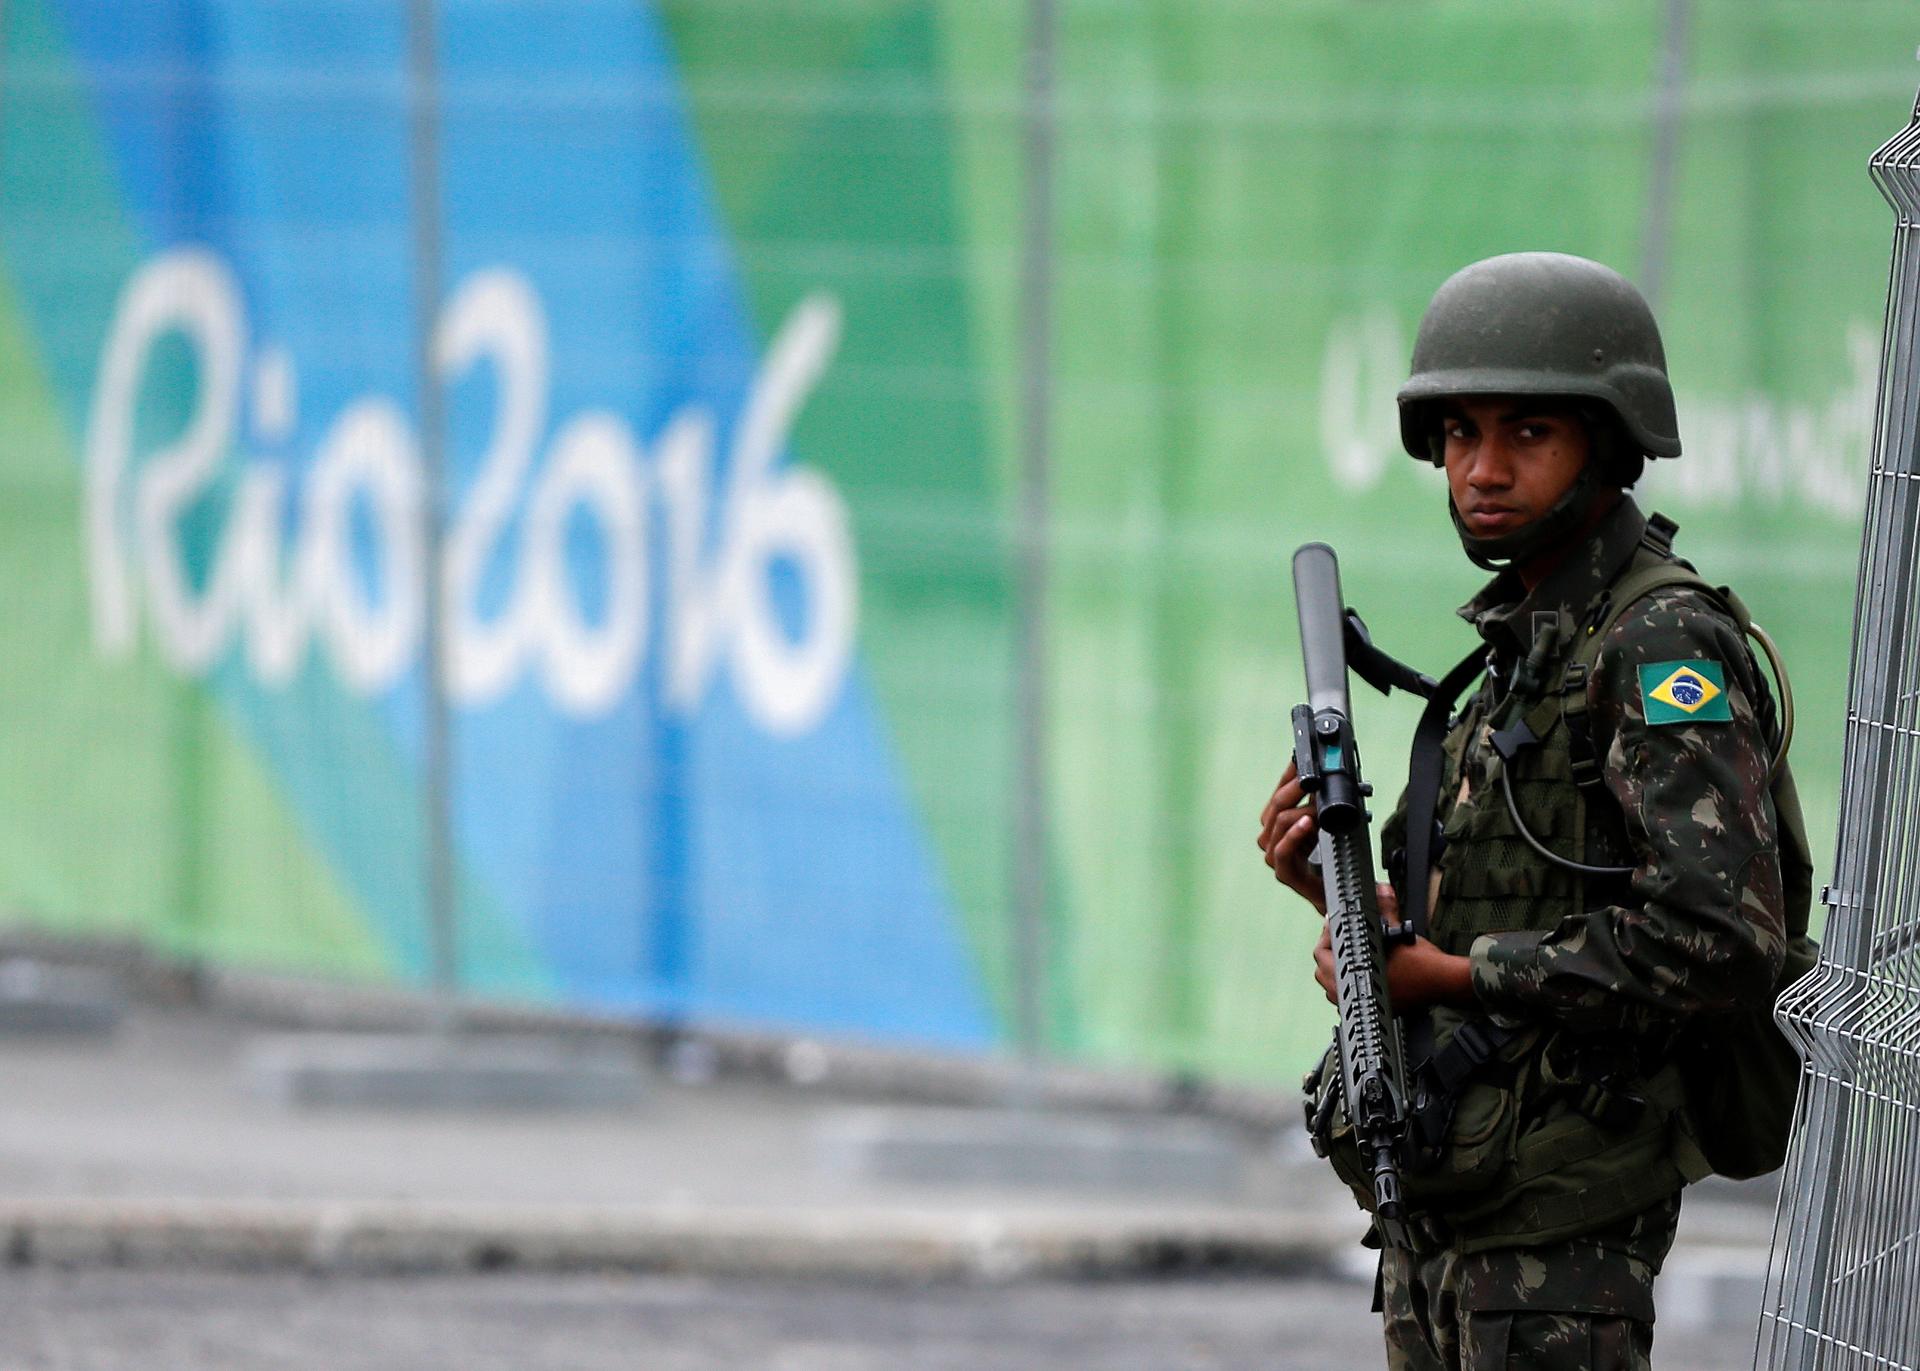 A Brazilian soldier stands guard outside the 2016 Rio Olympics Park in Rio de Janeiro, Brazil, on July 21.